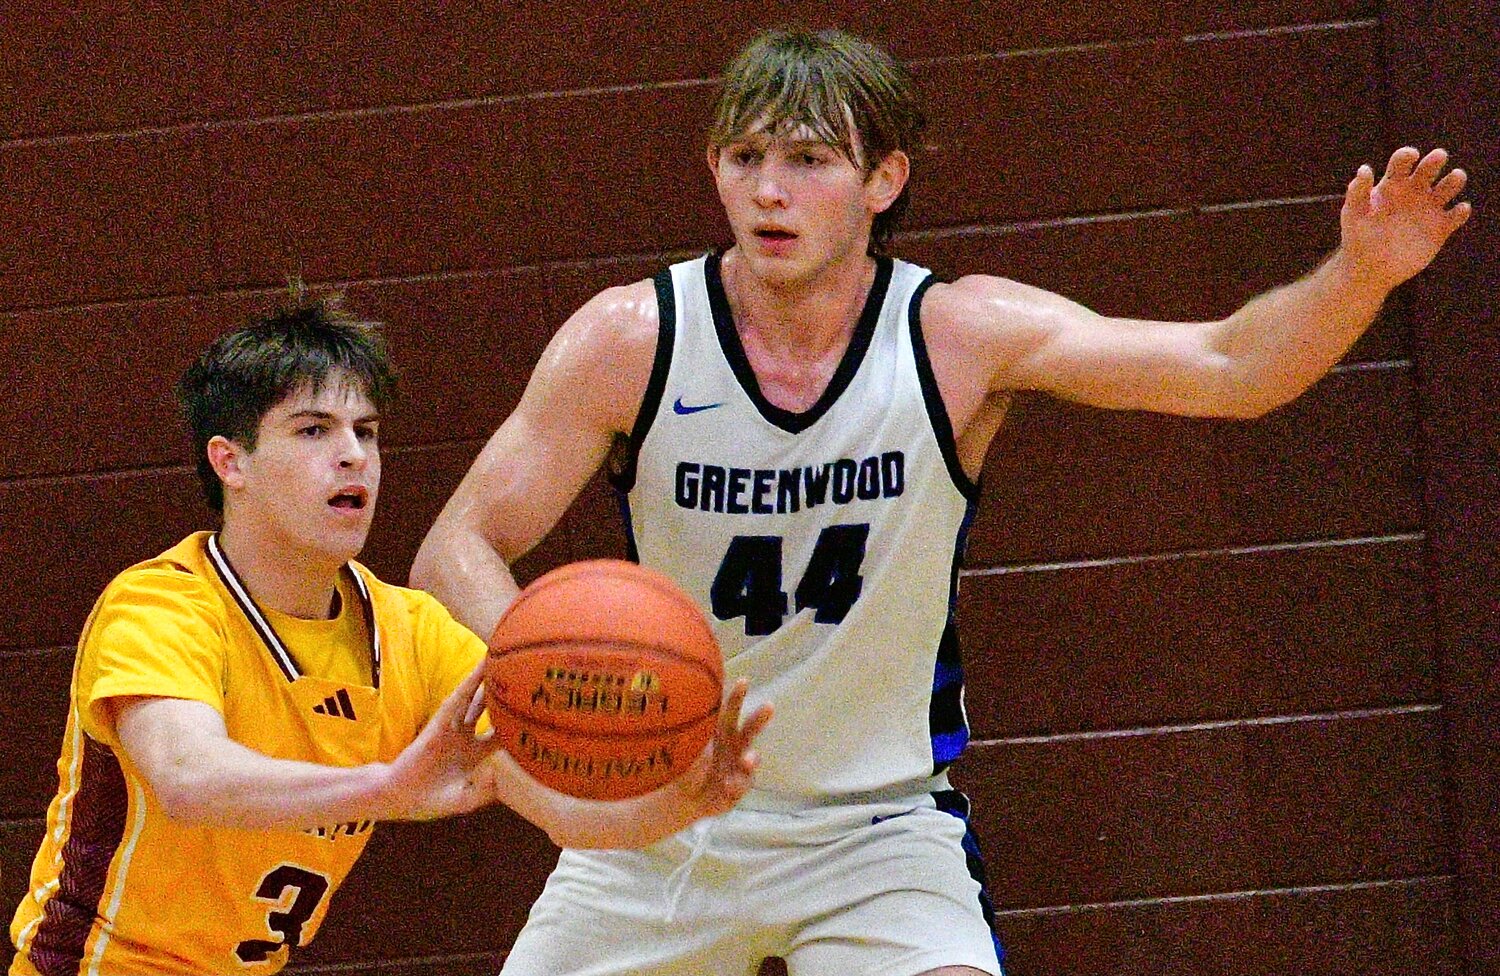 SPOKANE'S DAVID BLAKE makes a pass in front of a Greenwood defender.